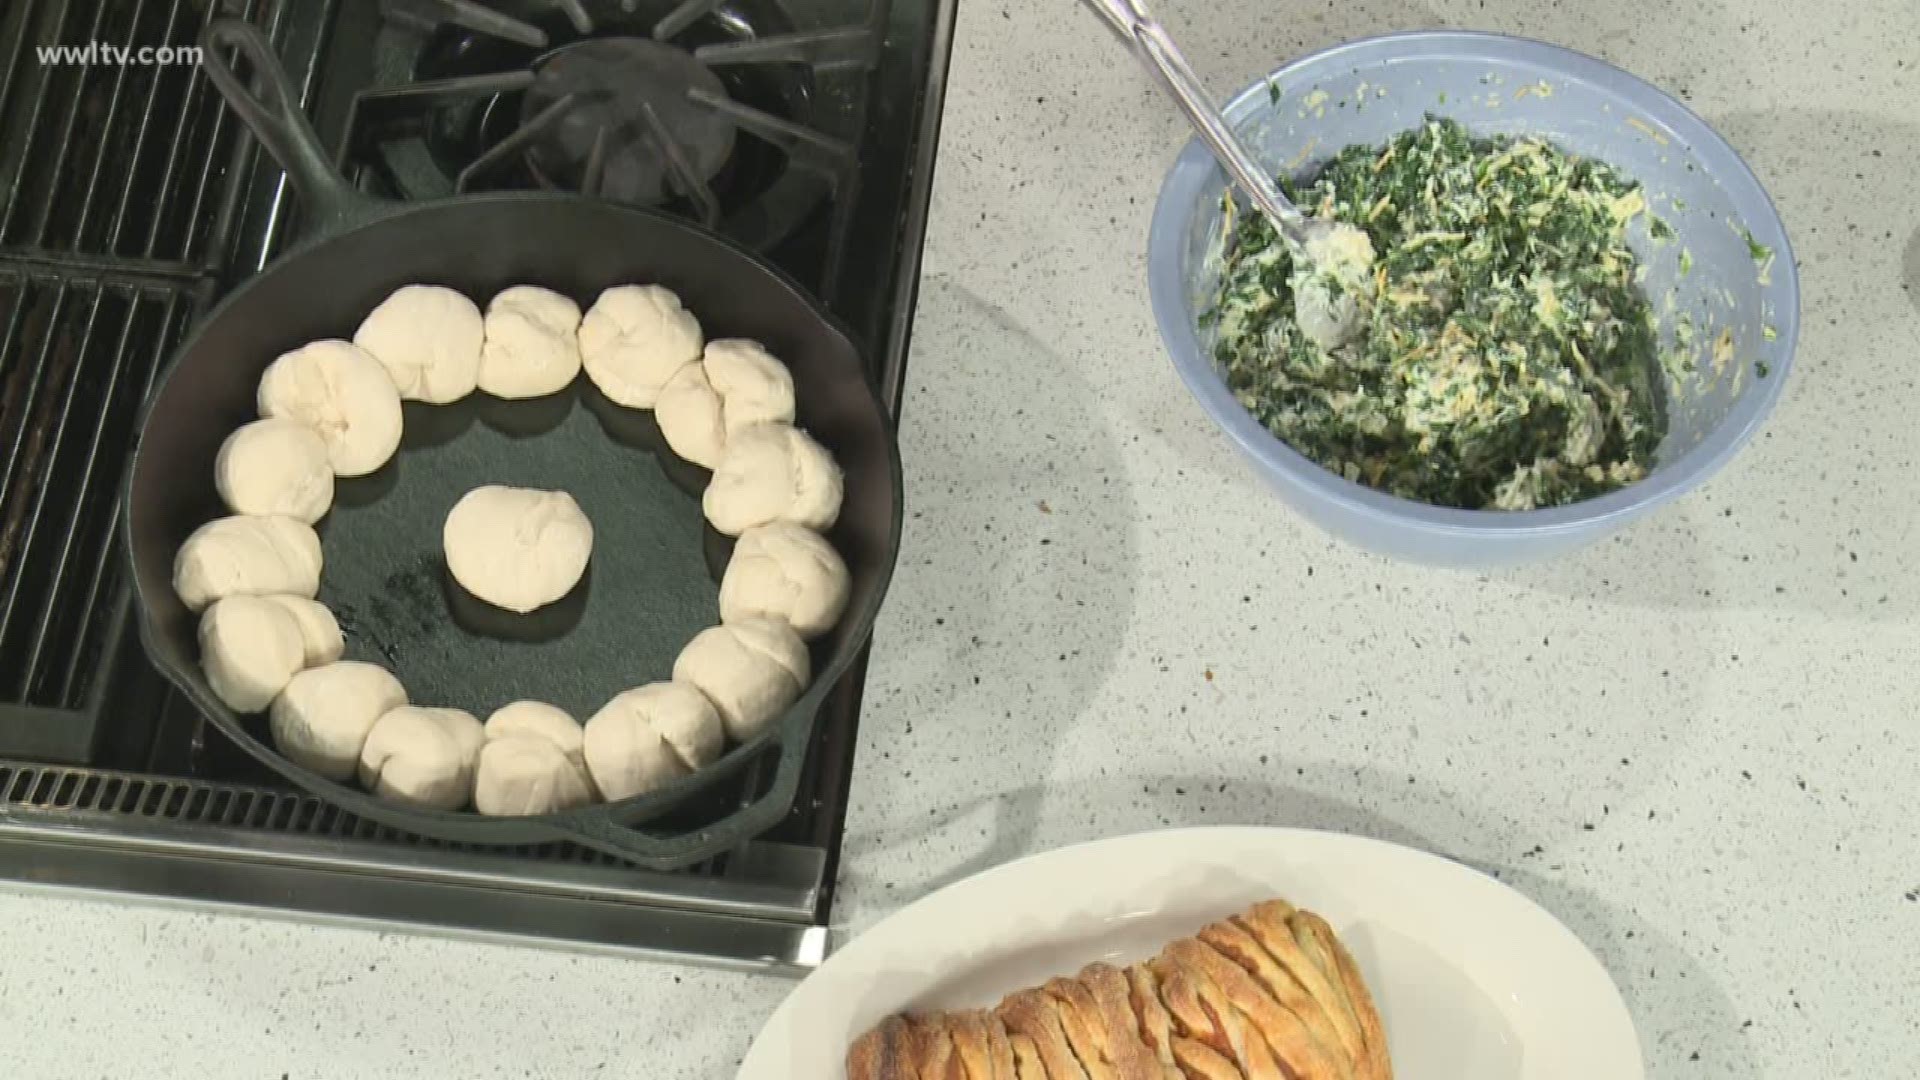 Chef Kevin has some savory and sweet biscuits recipes to try in honor of September being National Biscuit Month.